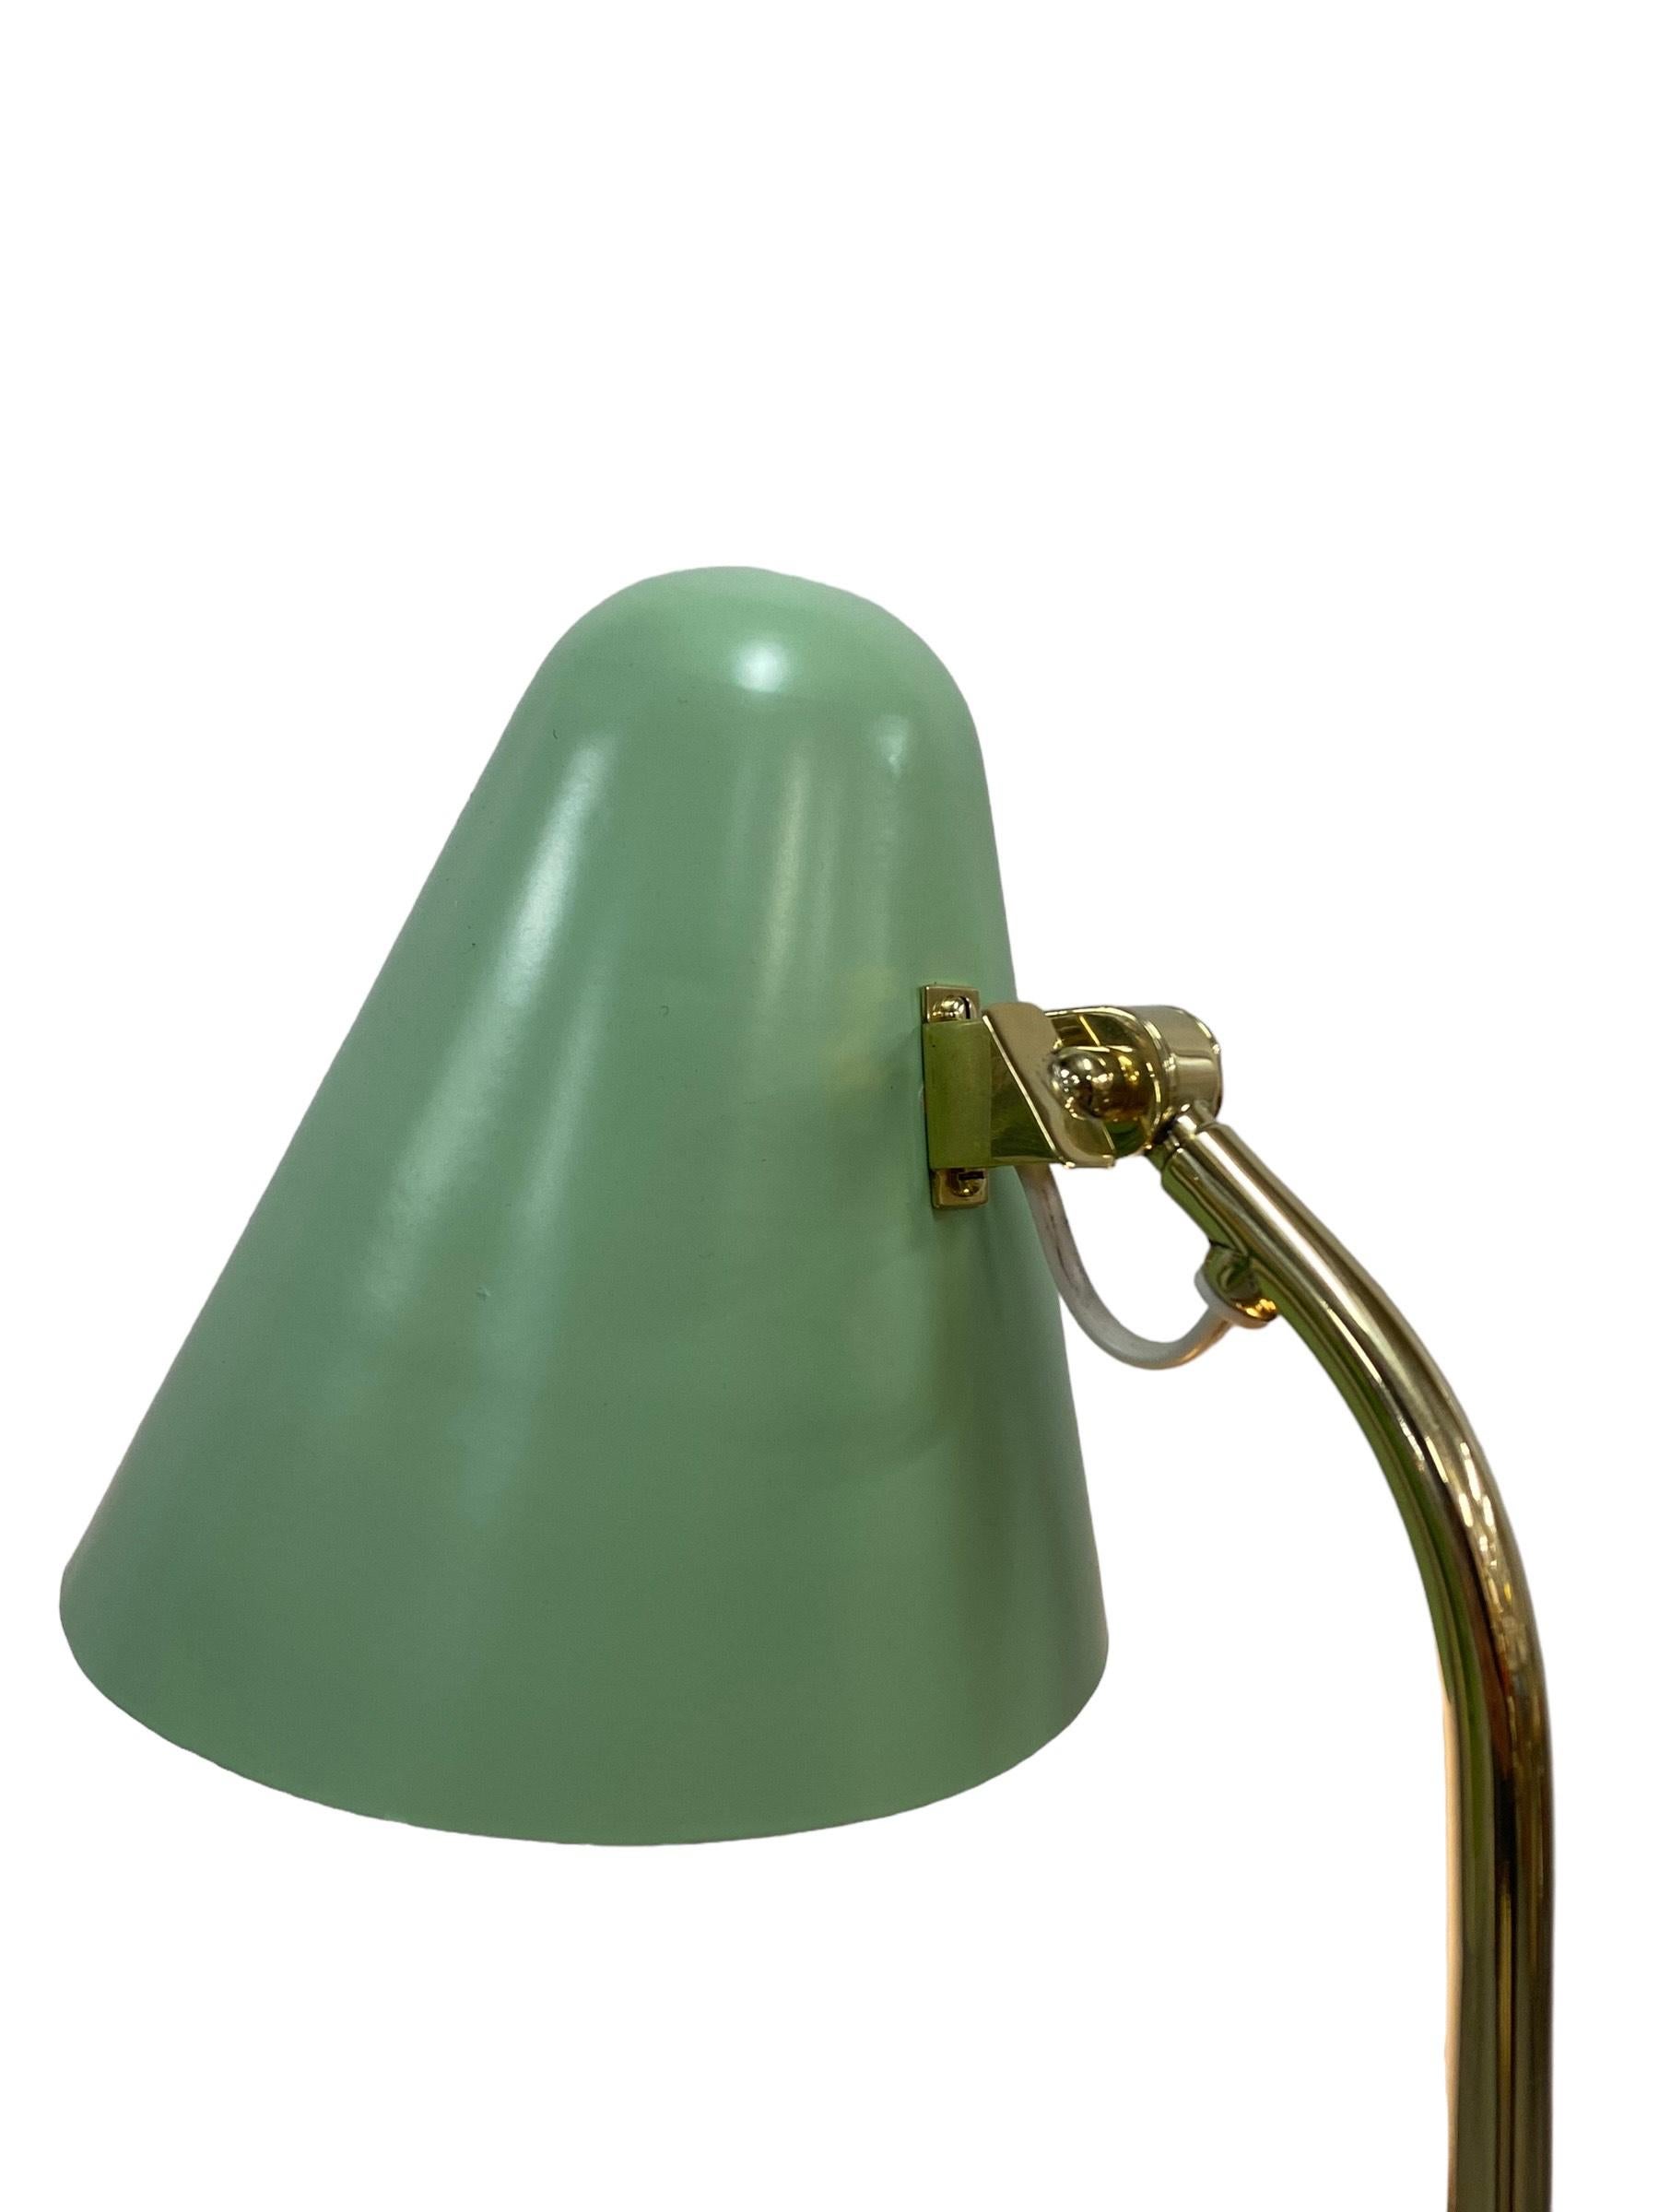 Finnish Paavo Tynell Table lamp Model. 5233, Taito Oy 1950s For Sale